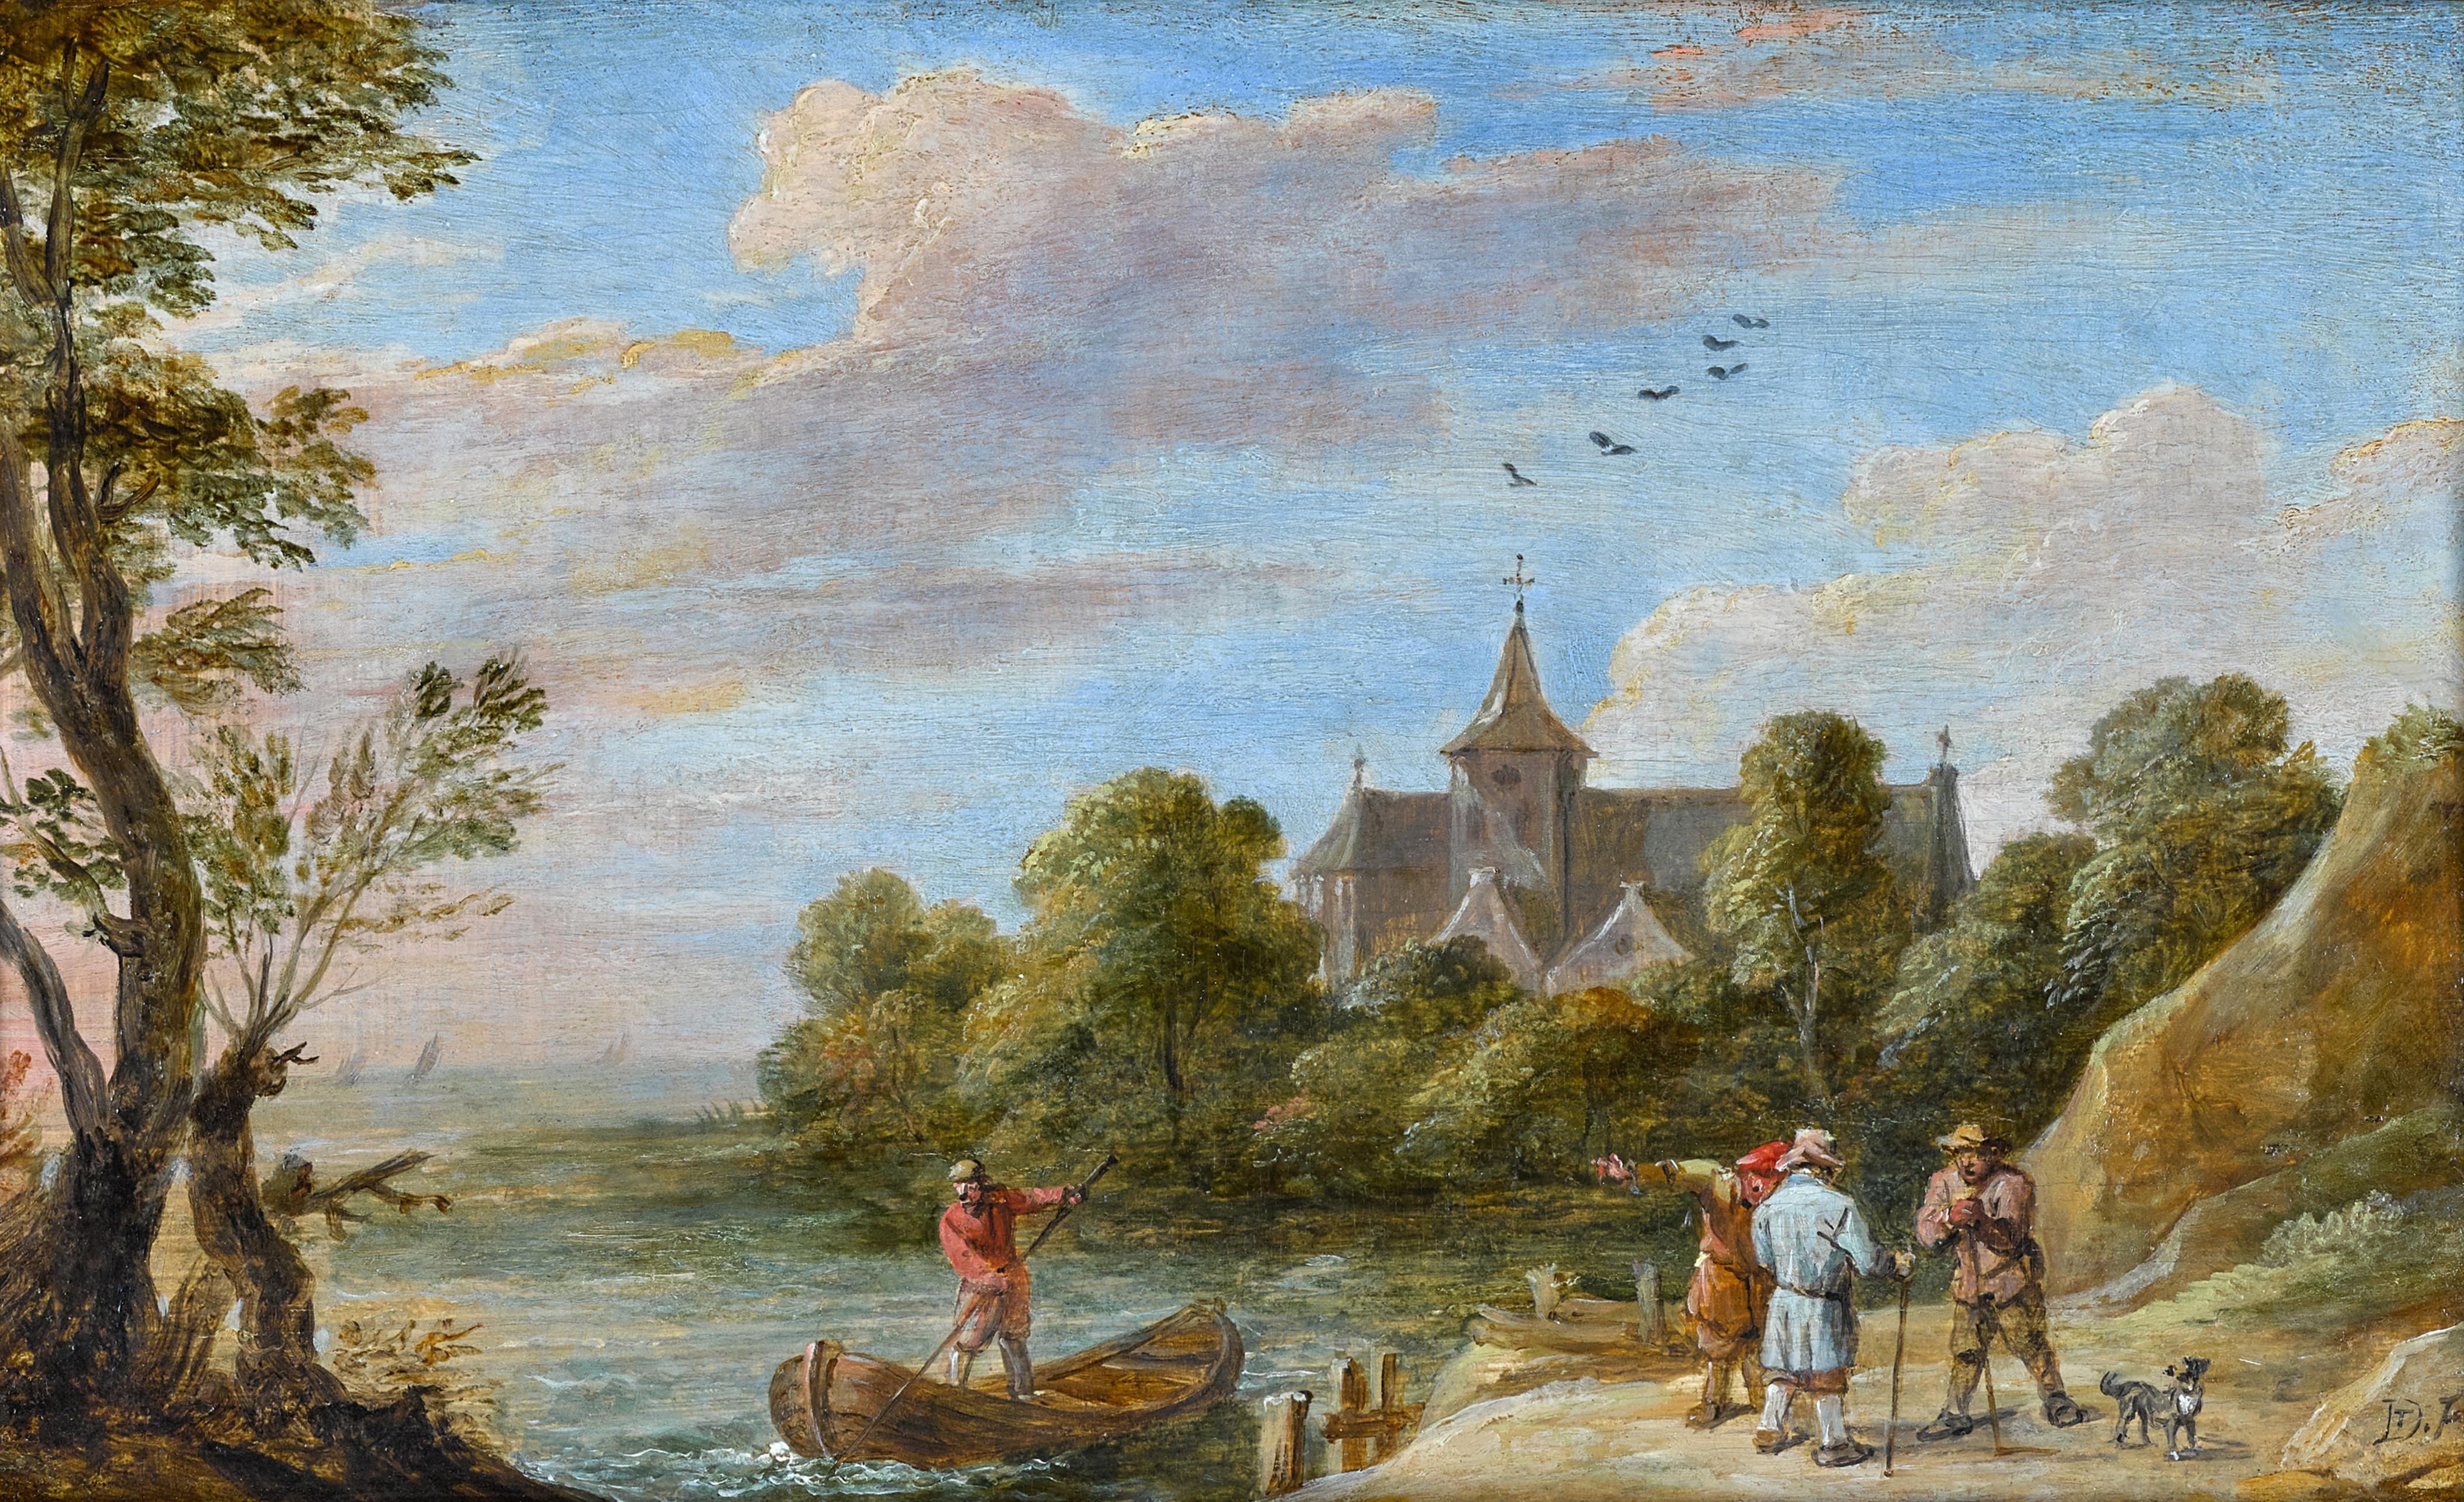 David Teniers the Younger Landscape Painting - A river landscape with travellers by a jetty and a man in a rowing boat